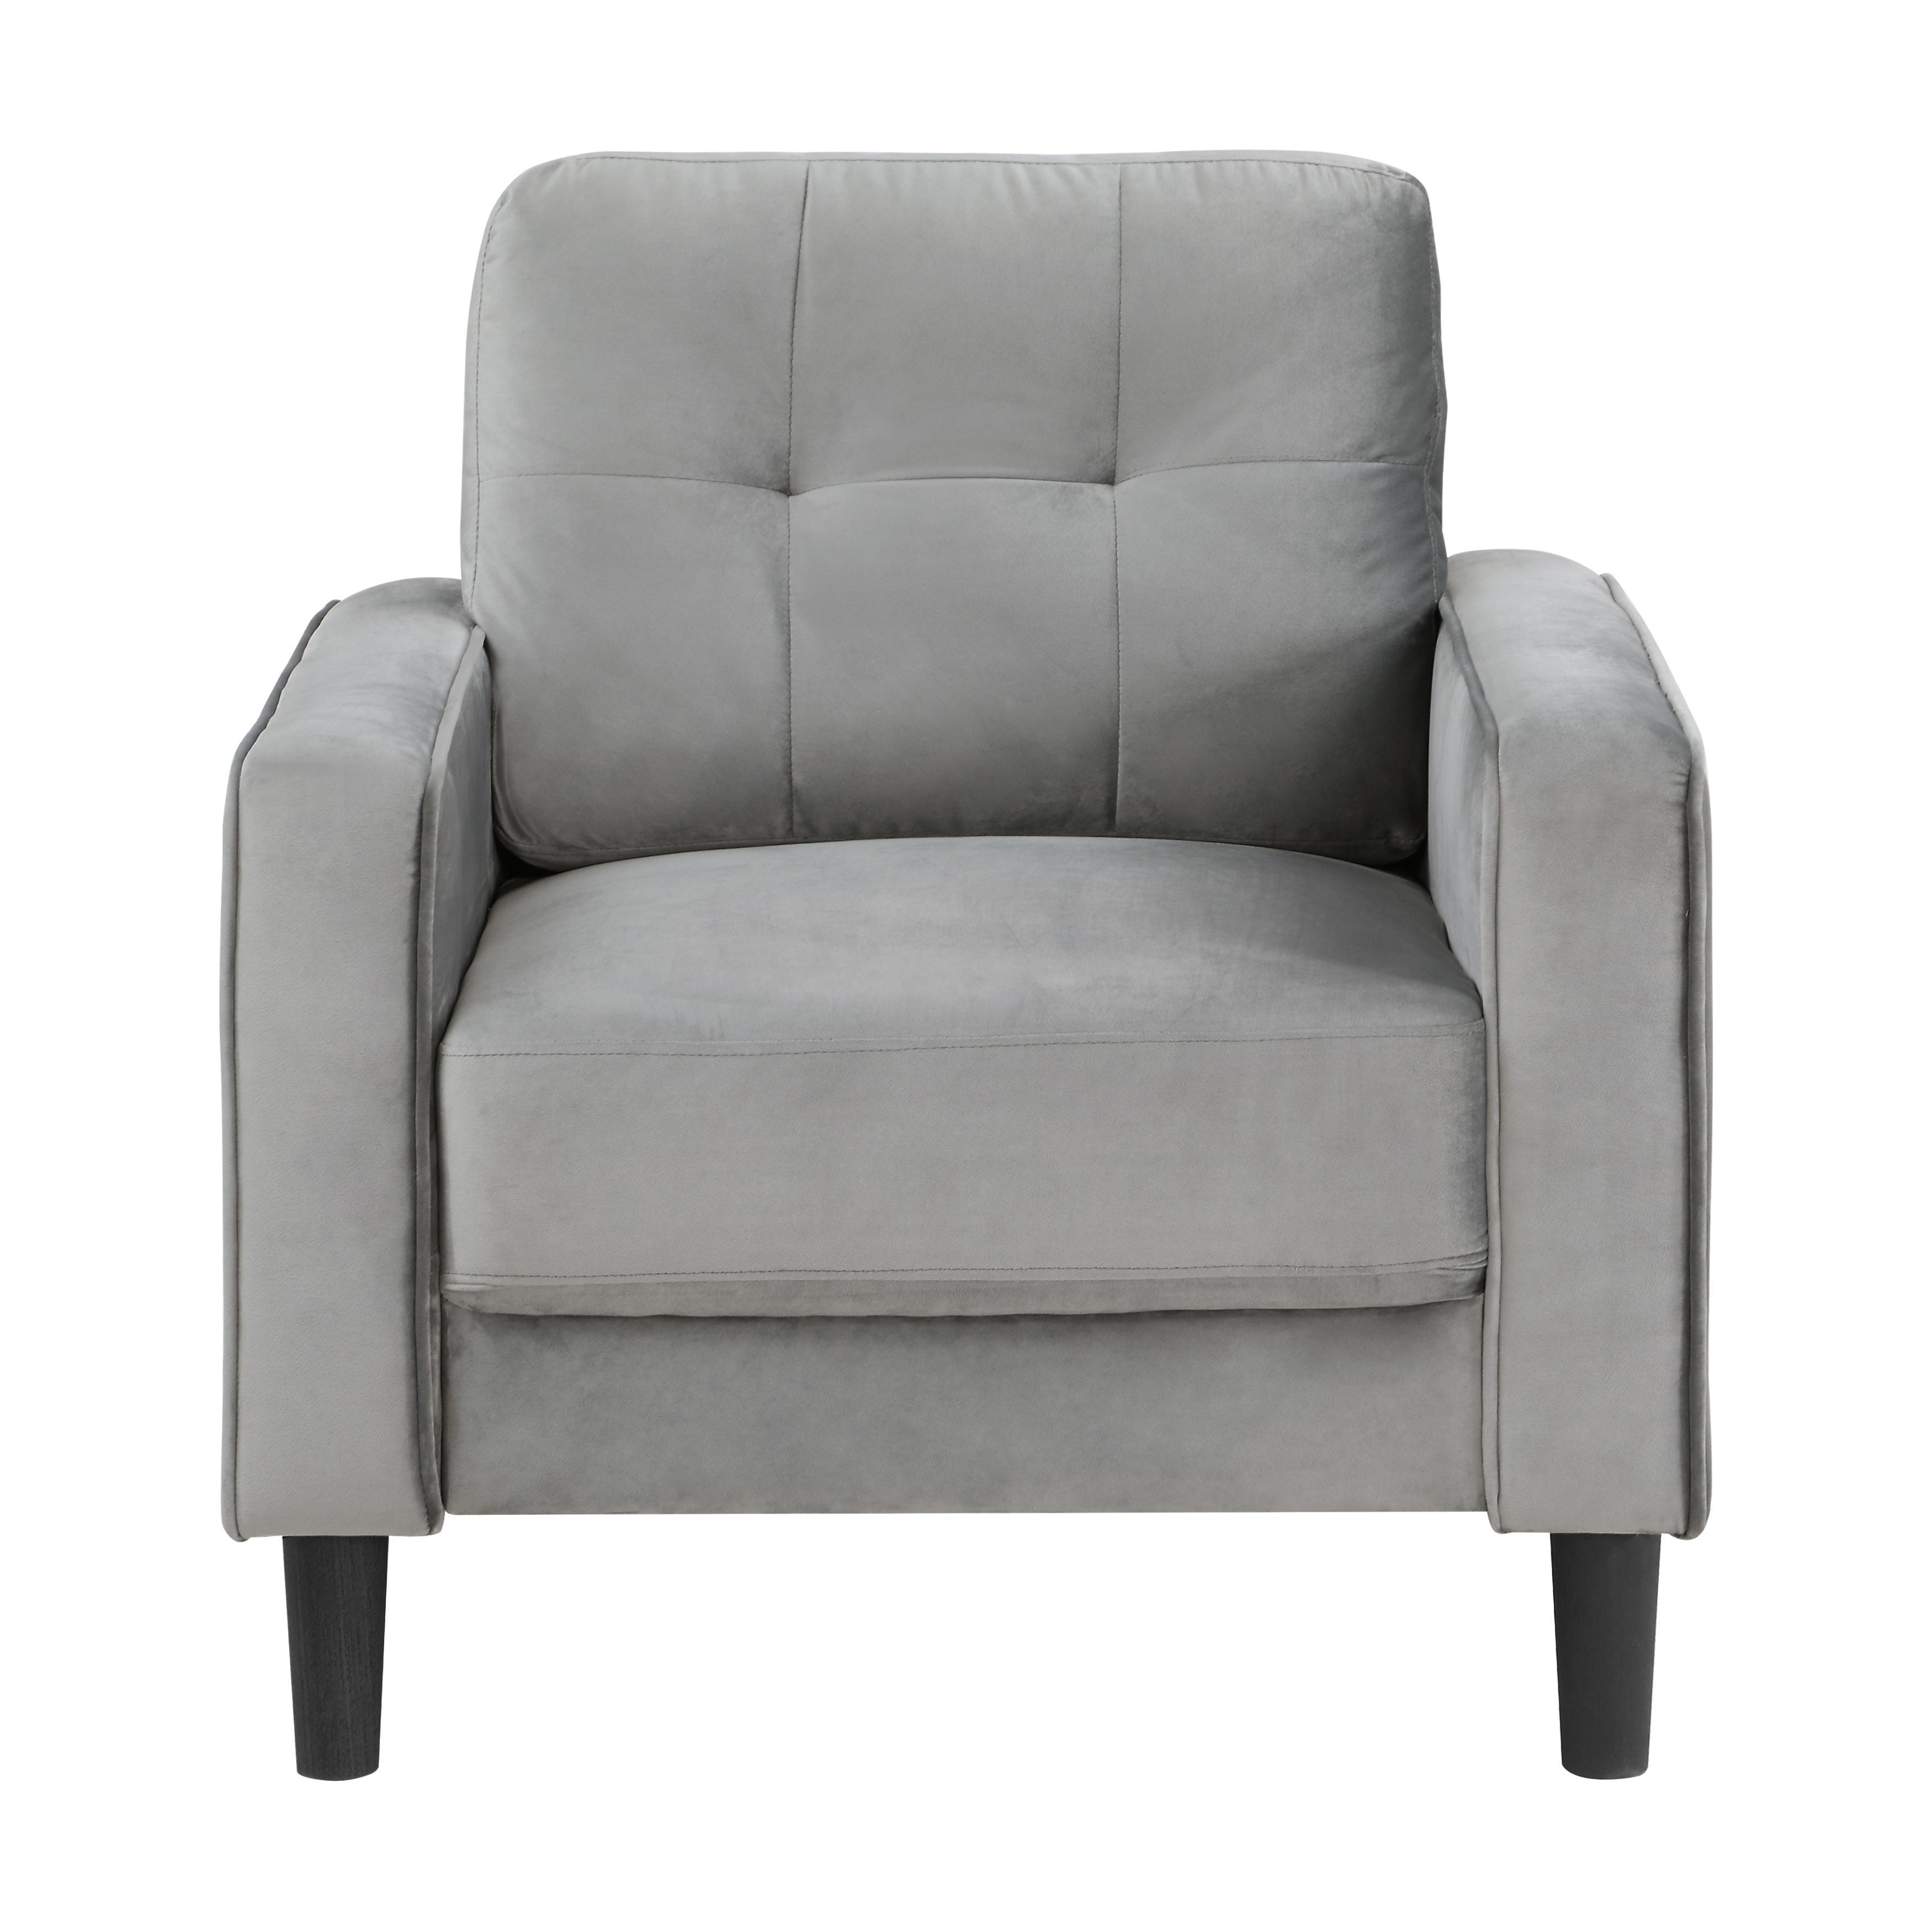 Homelegance 9208GY-1 Beven Arm Chair